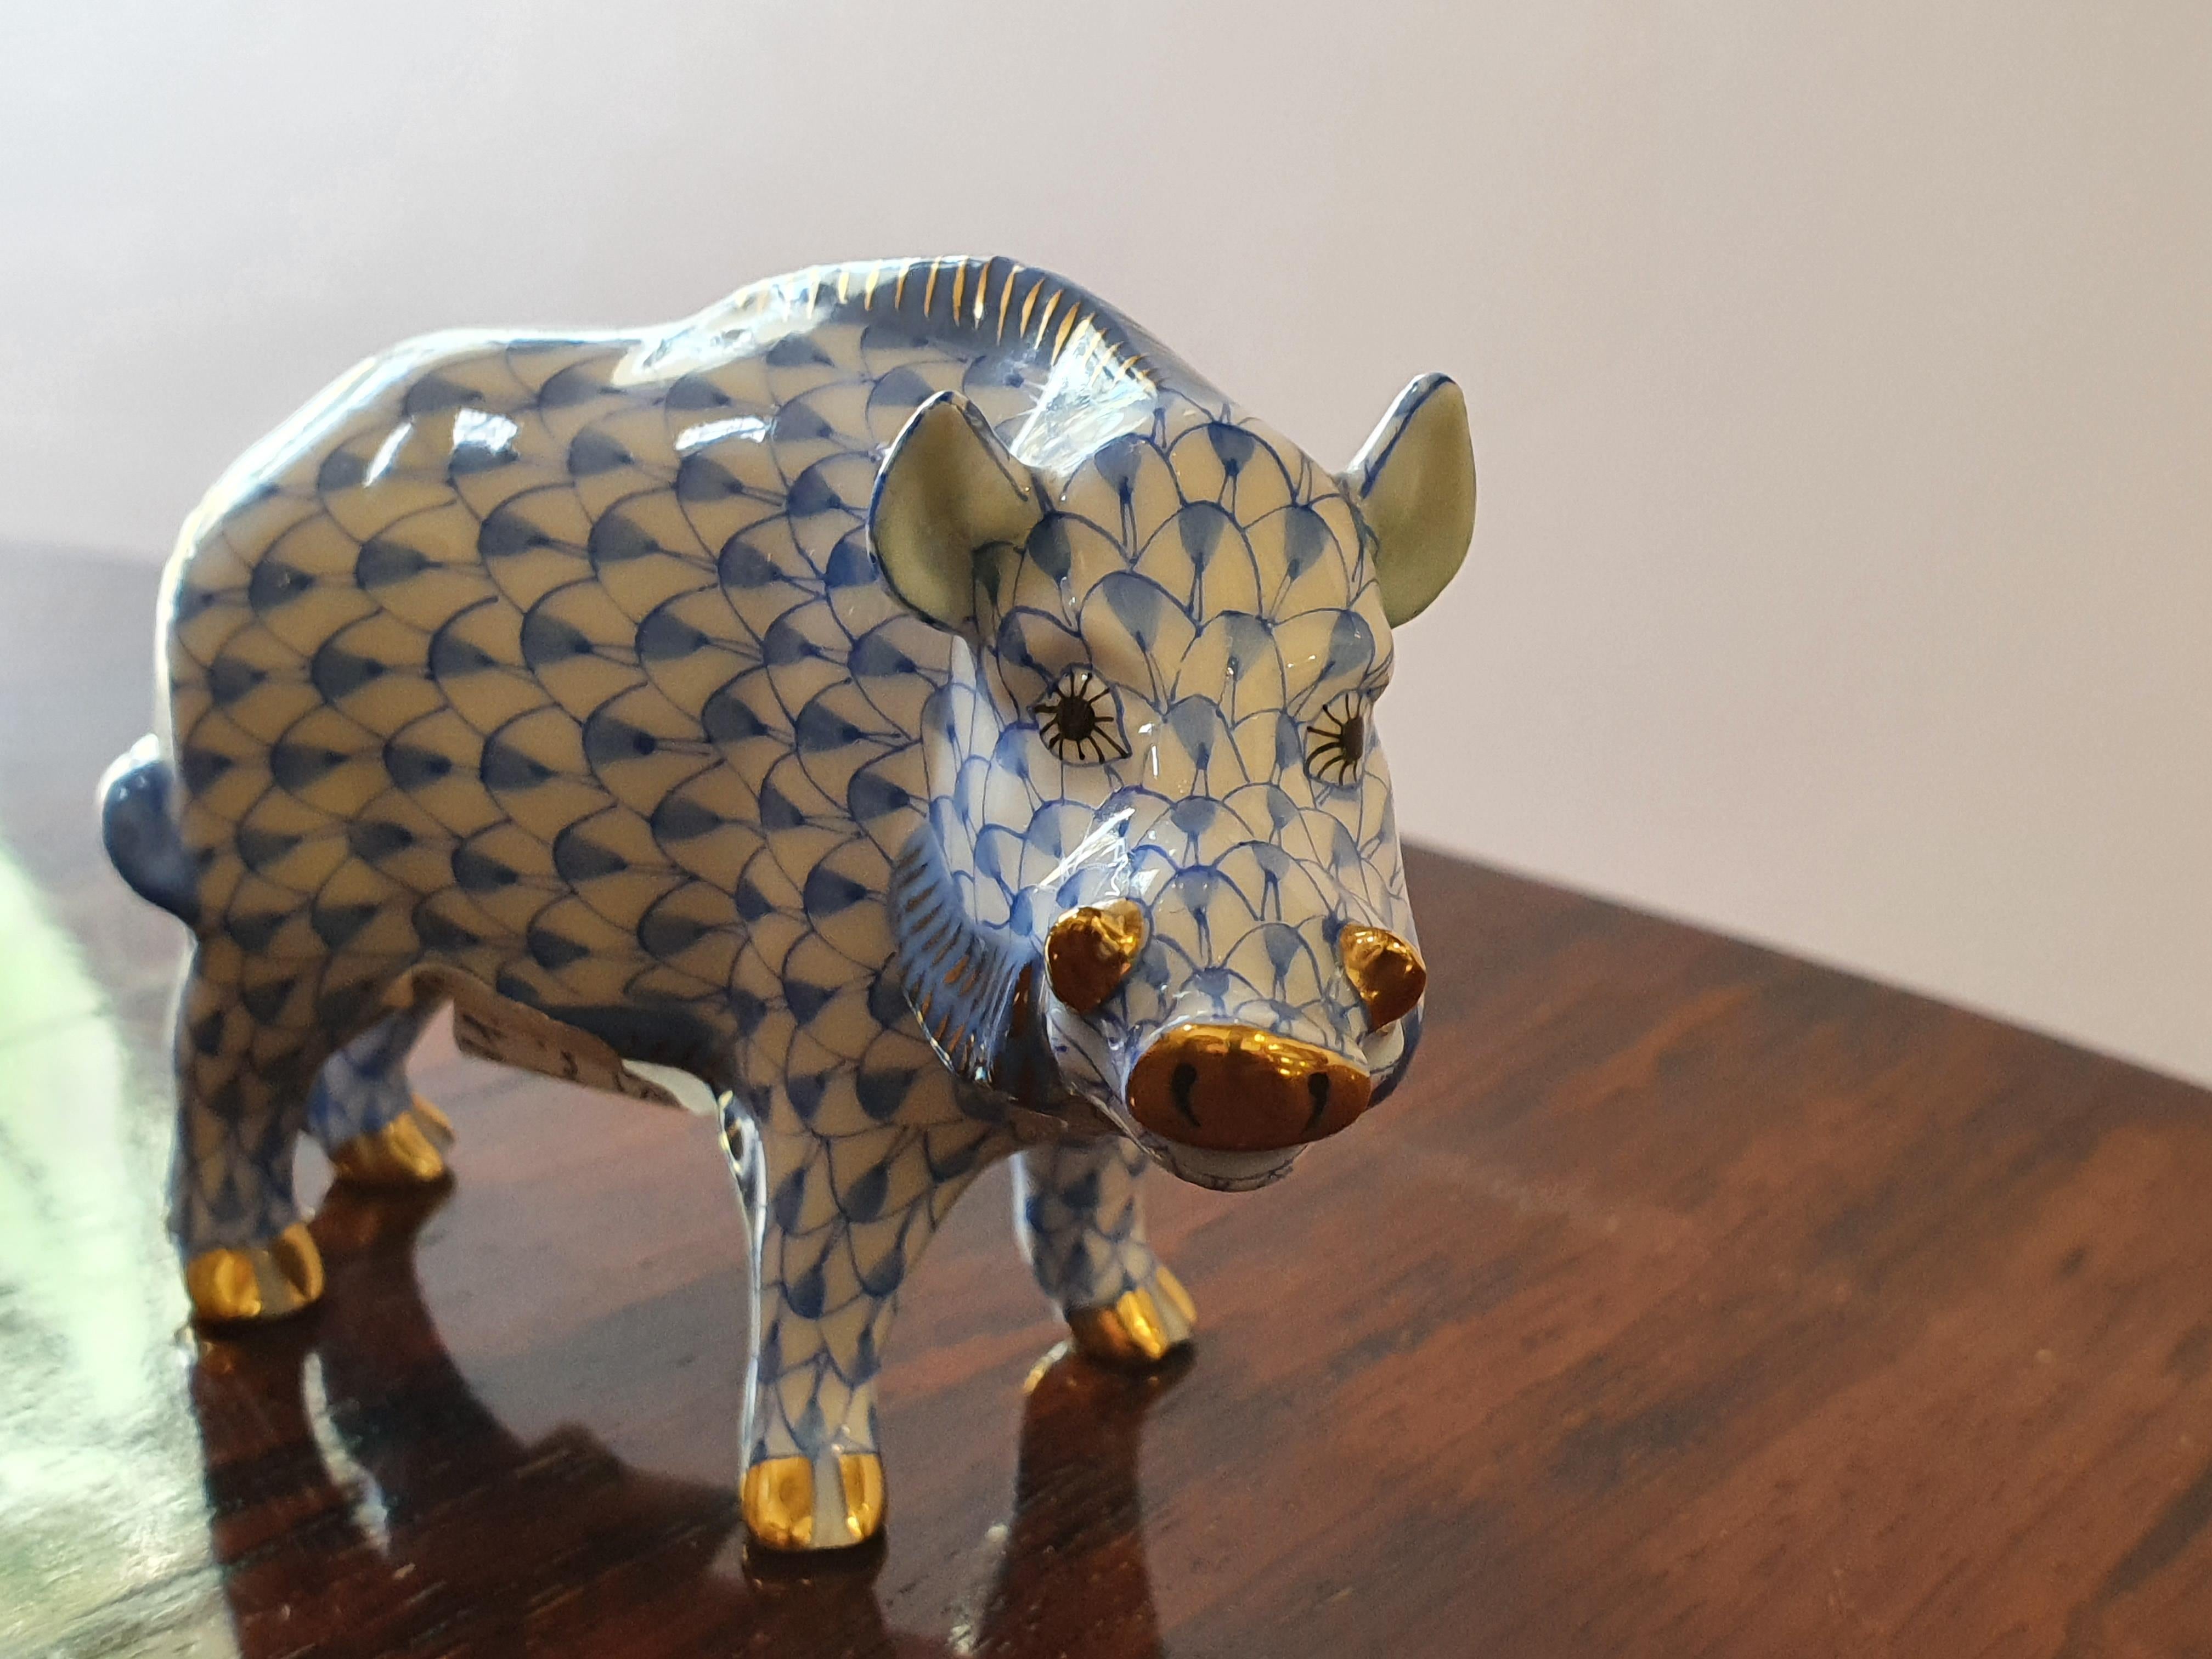 A hand painted blue fish scale wild boar figurine, golden feet, nose and fangs.
New, never used.
Since 1826, Herend's factory has been one of the most famous centers for the production of hand painted porcelain, supplier of royal houses,